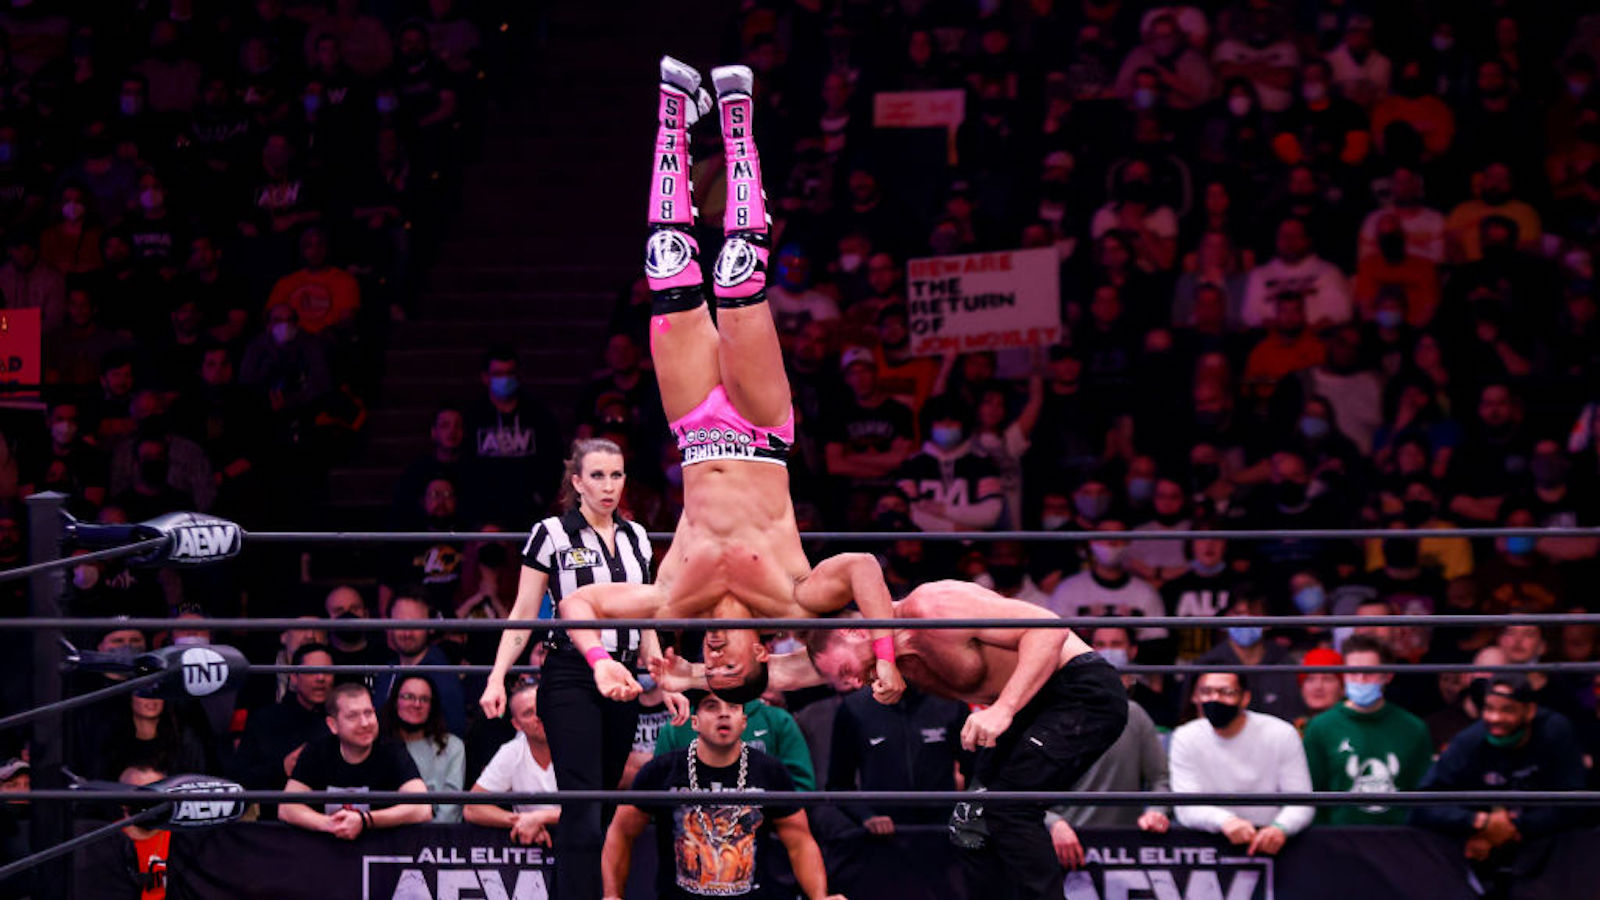 Jon Moxley delivers a move to Anthony Bowens during the AEW Dynamite - Beach Break taping on January 26, 2022, at the Wolstein Center in Cleveland, OH.